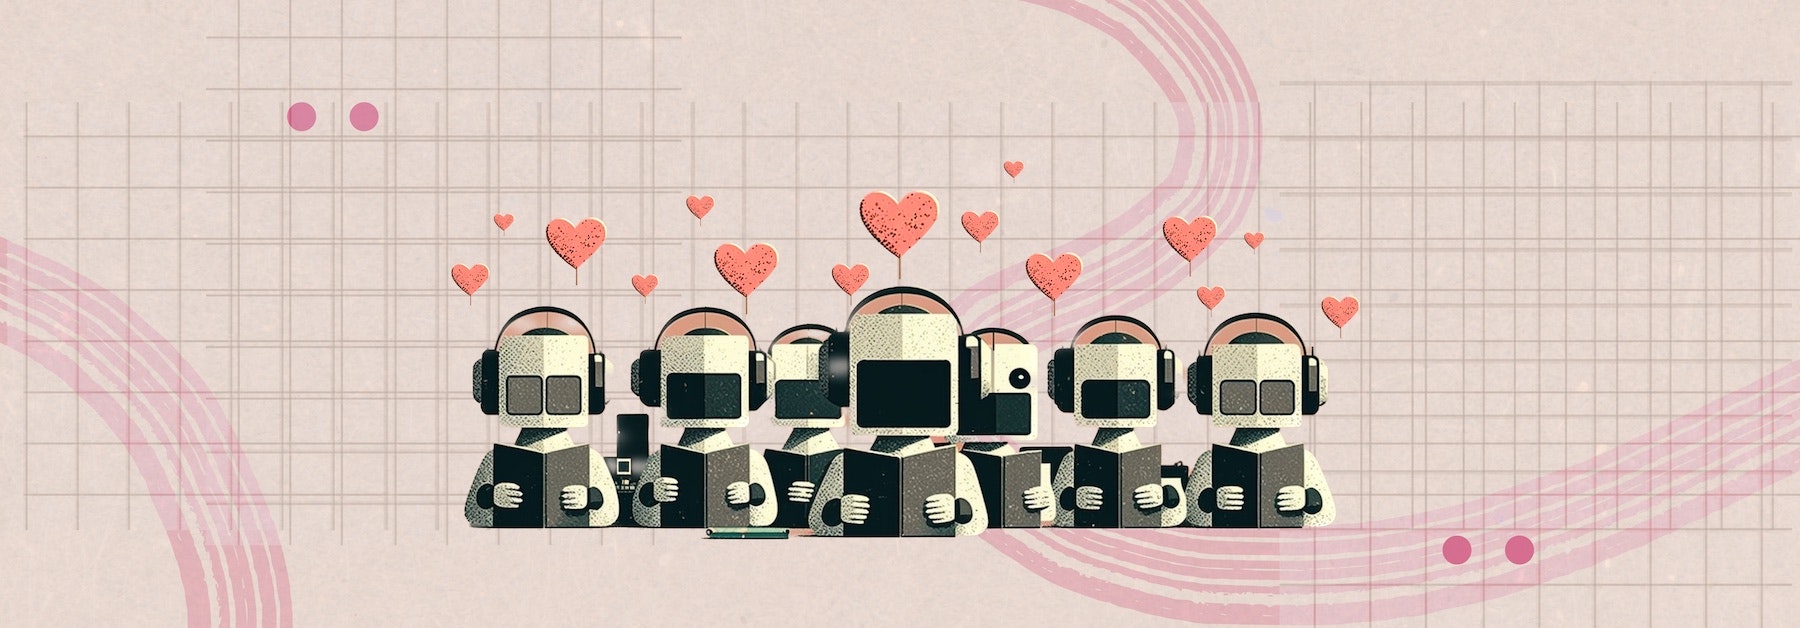 An AI-generated image of robots reading books with headphones on, with love hearts extending from their heads.